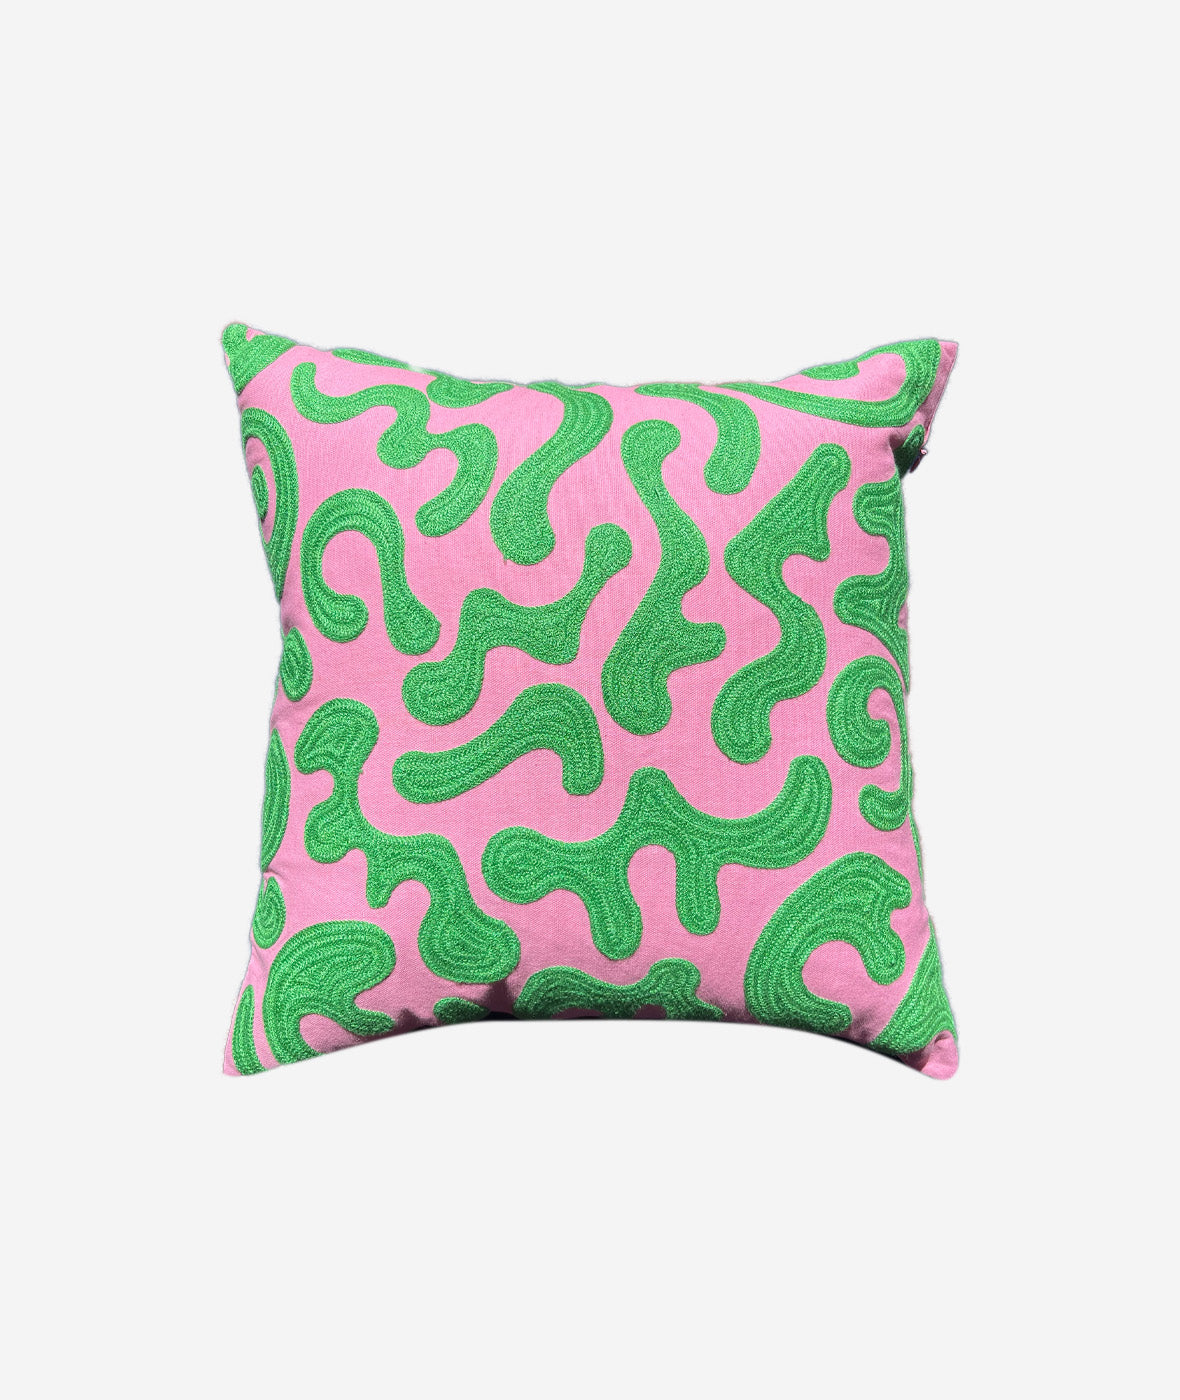 Silly Squiggles Pillow